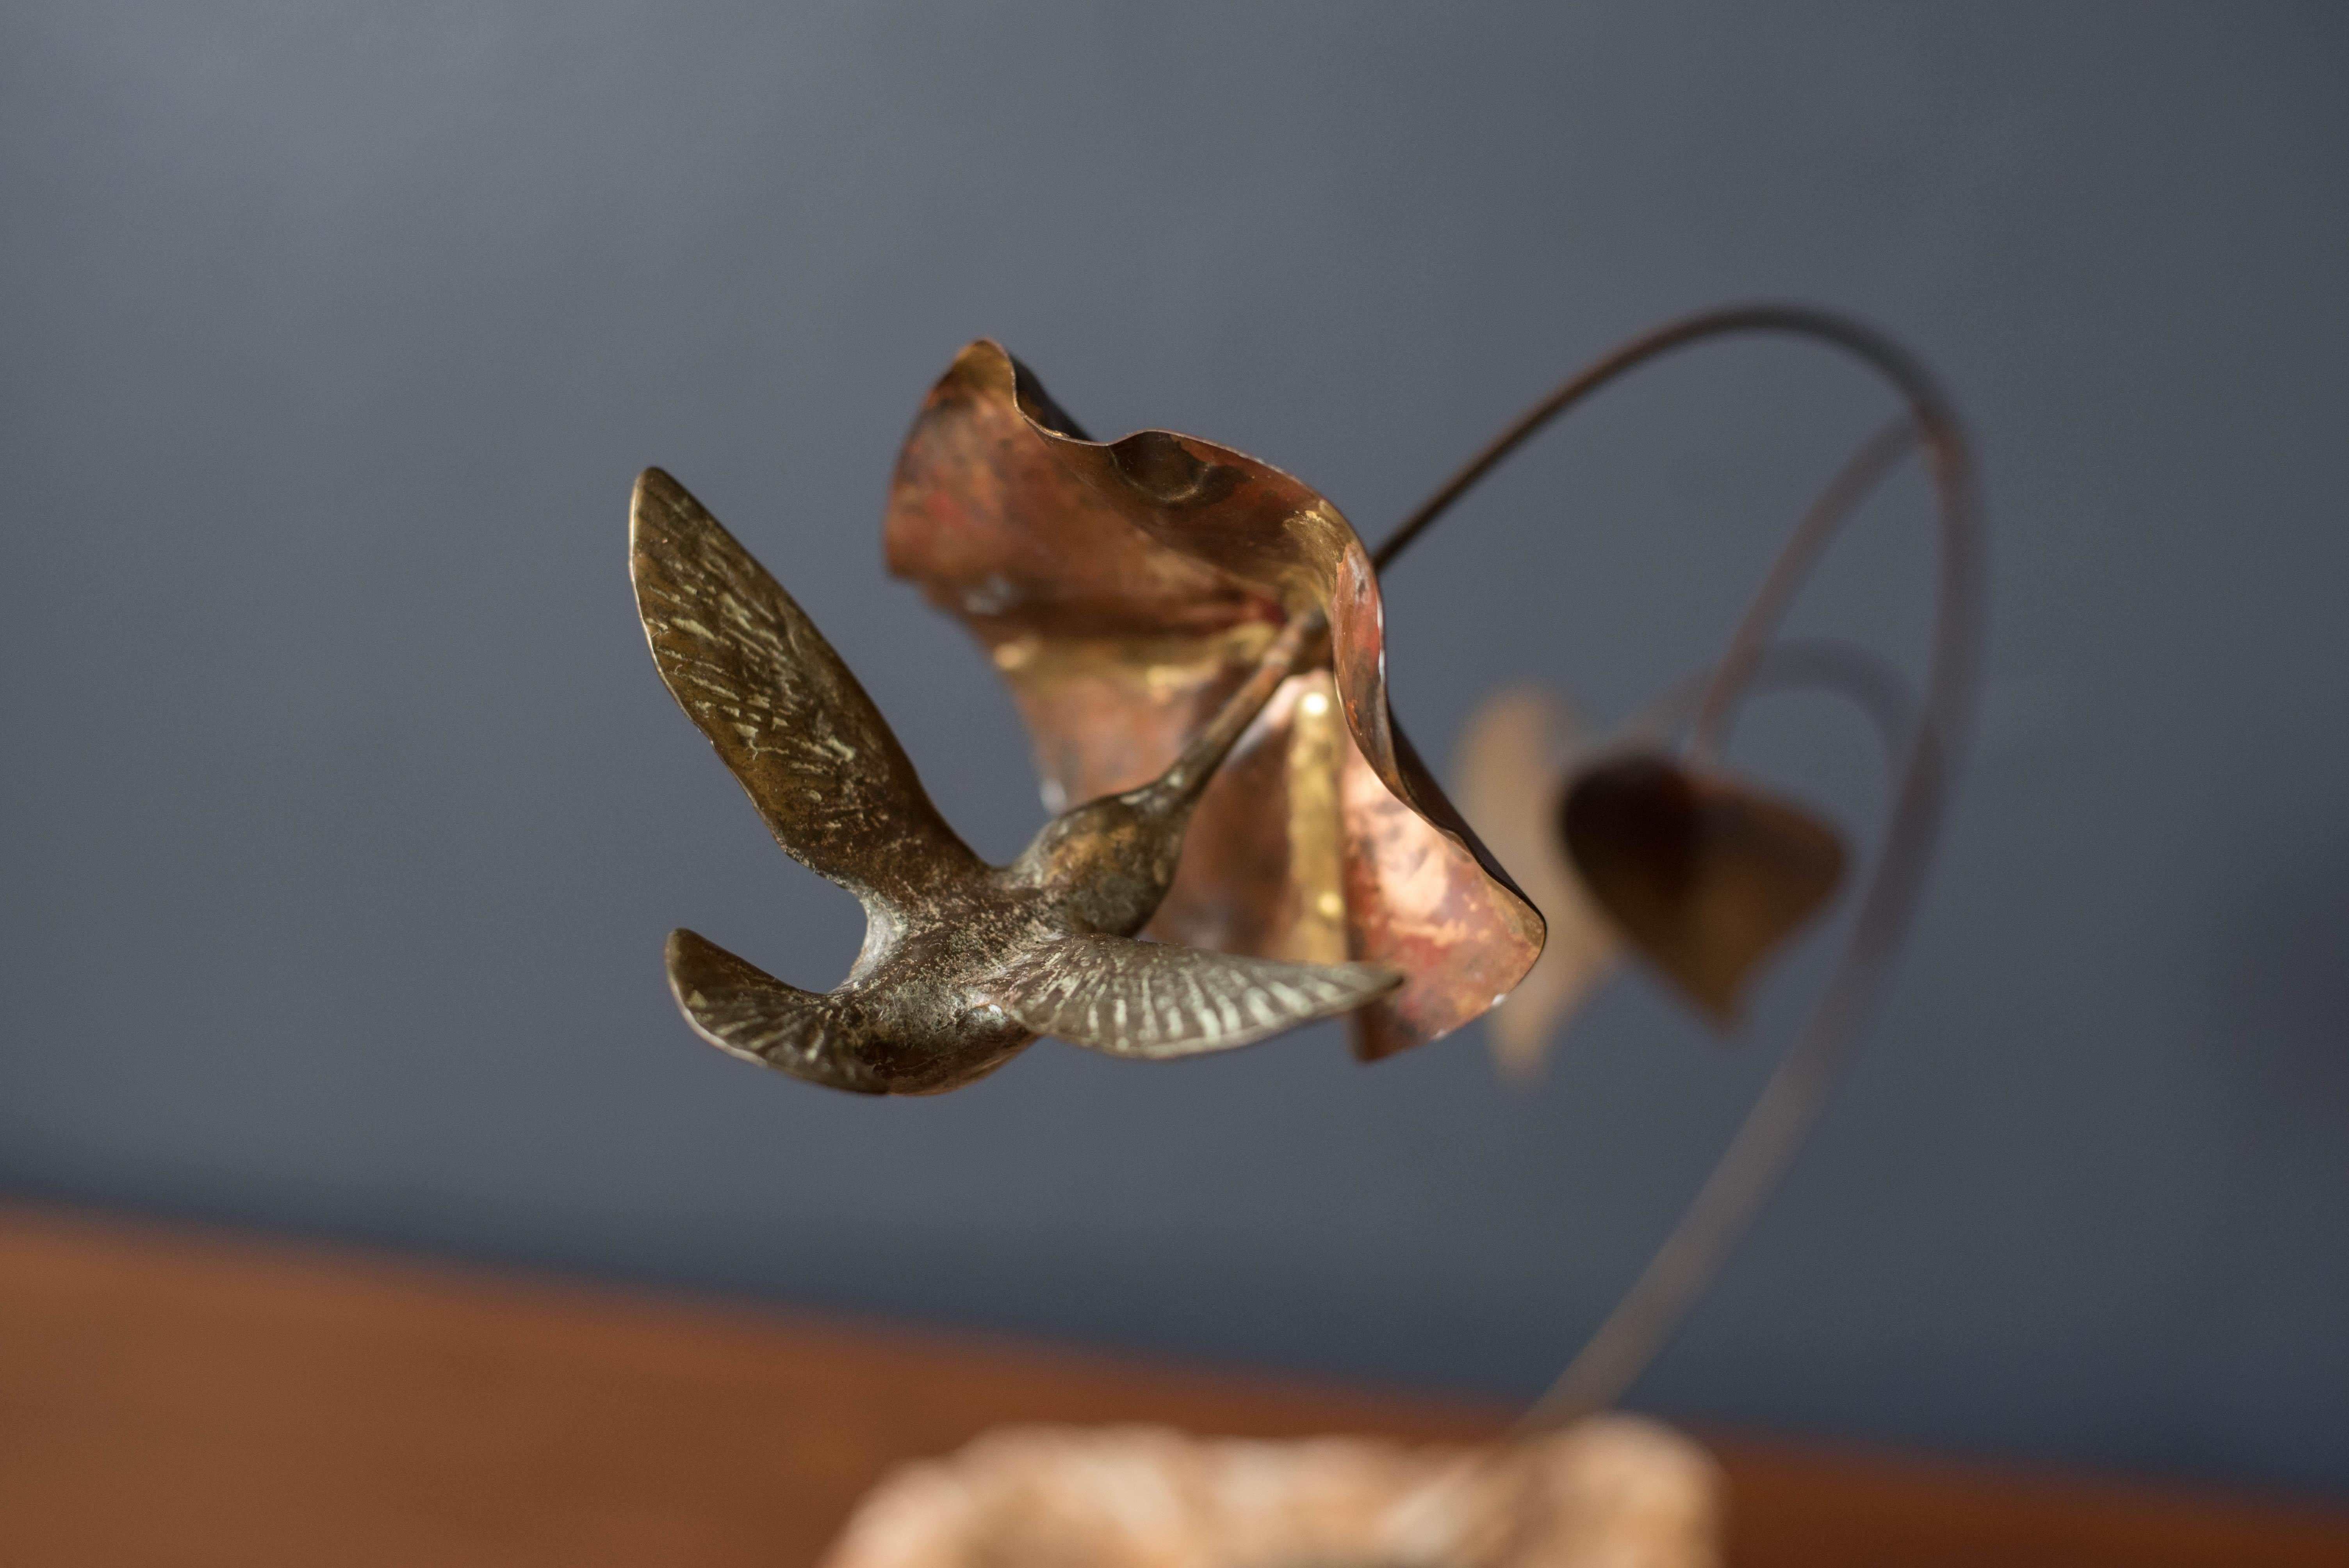 Vintage bronze sculpture on stone signed Bijan circa 1970's. This playful design of 'Hummingbird with Flower' is suspended with mixed metals that is mounted on a heavy striated stone base.